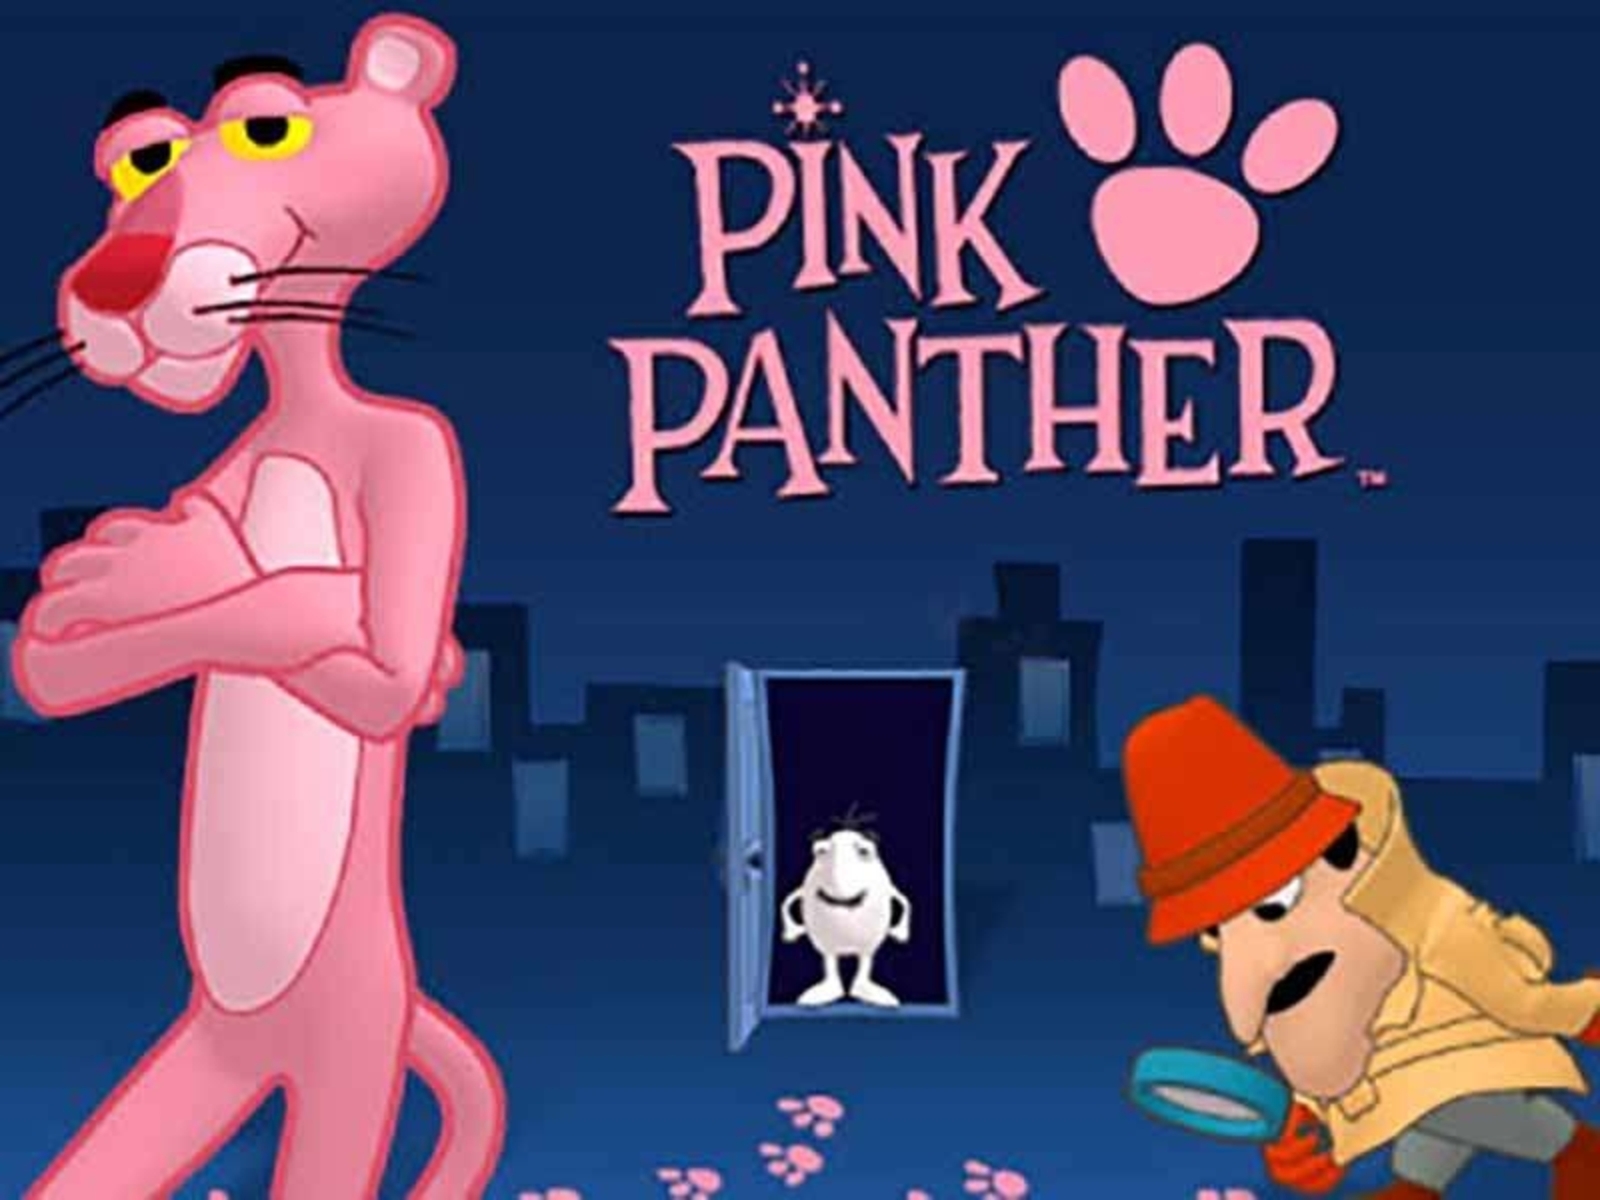 The Pink Panther Online Slot Demo Game by Playtech